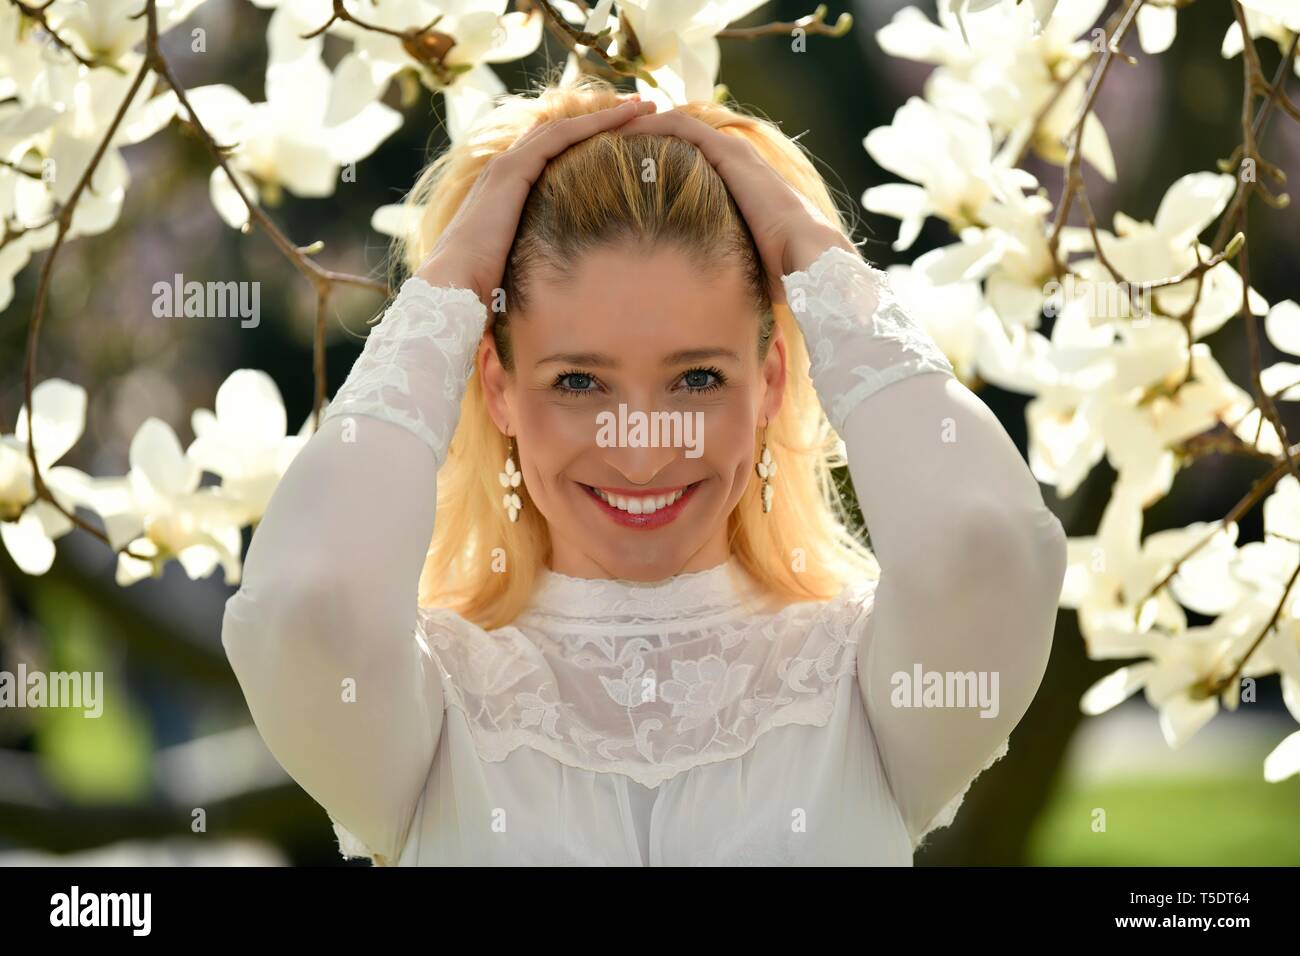 Blonde woman driving her hands through her hair, portrait in front of a blooming magnolia tree, Baden-Wurttemberg, Germany Stock Photo